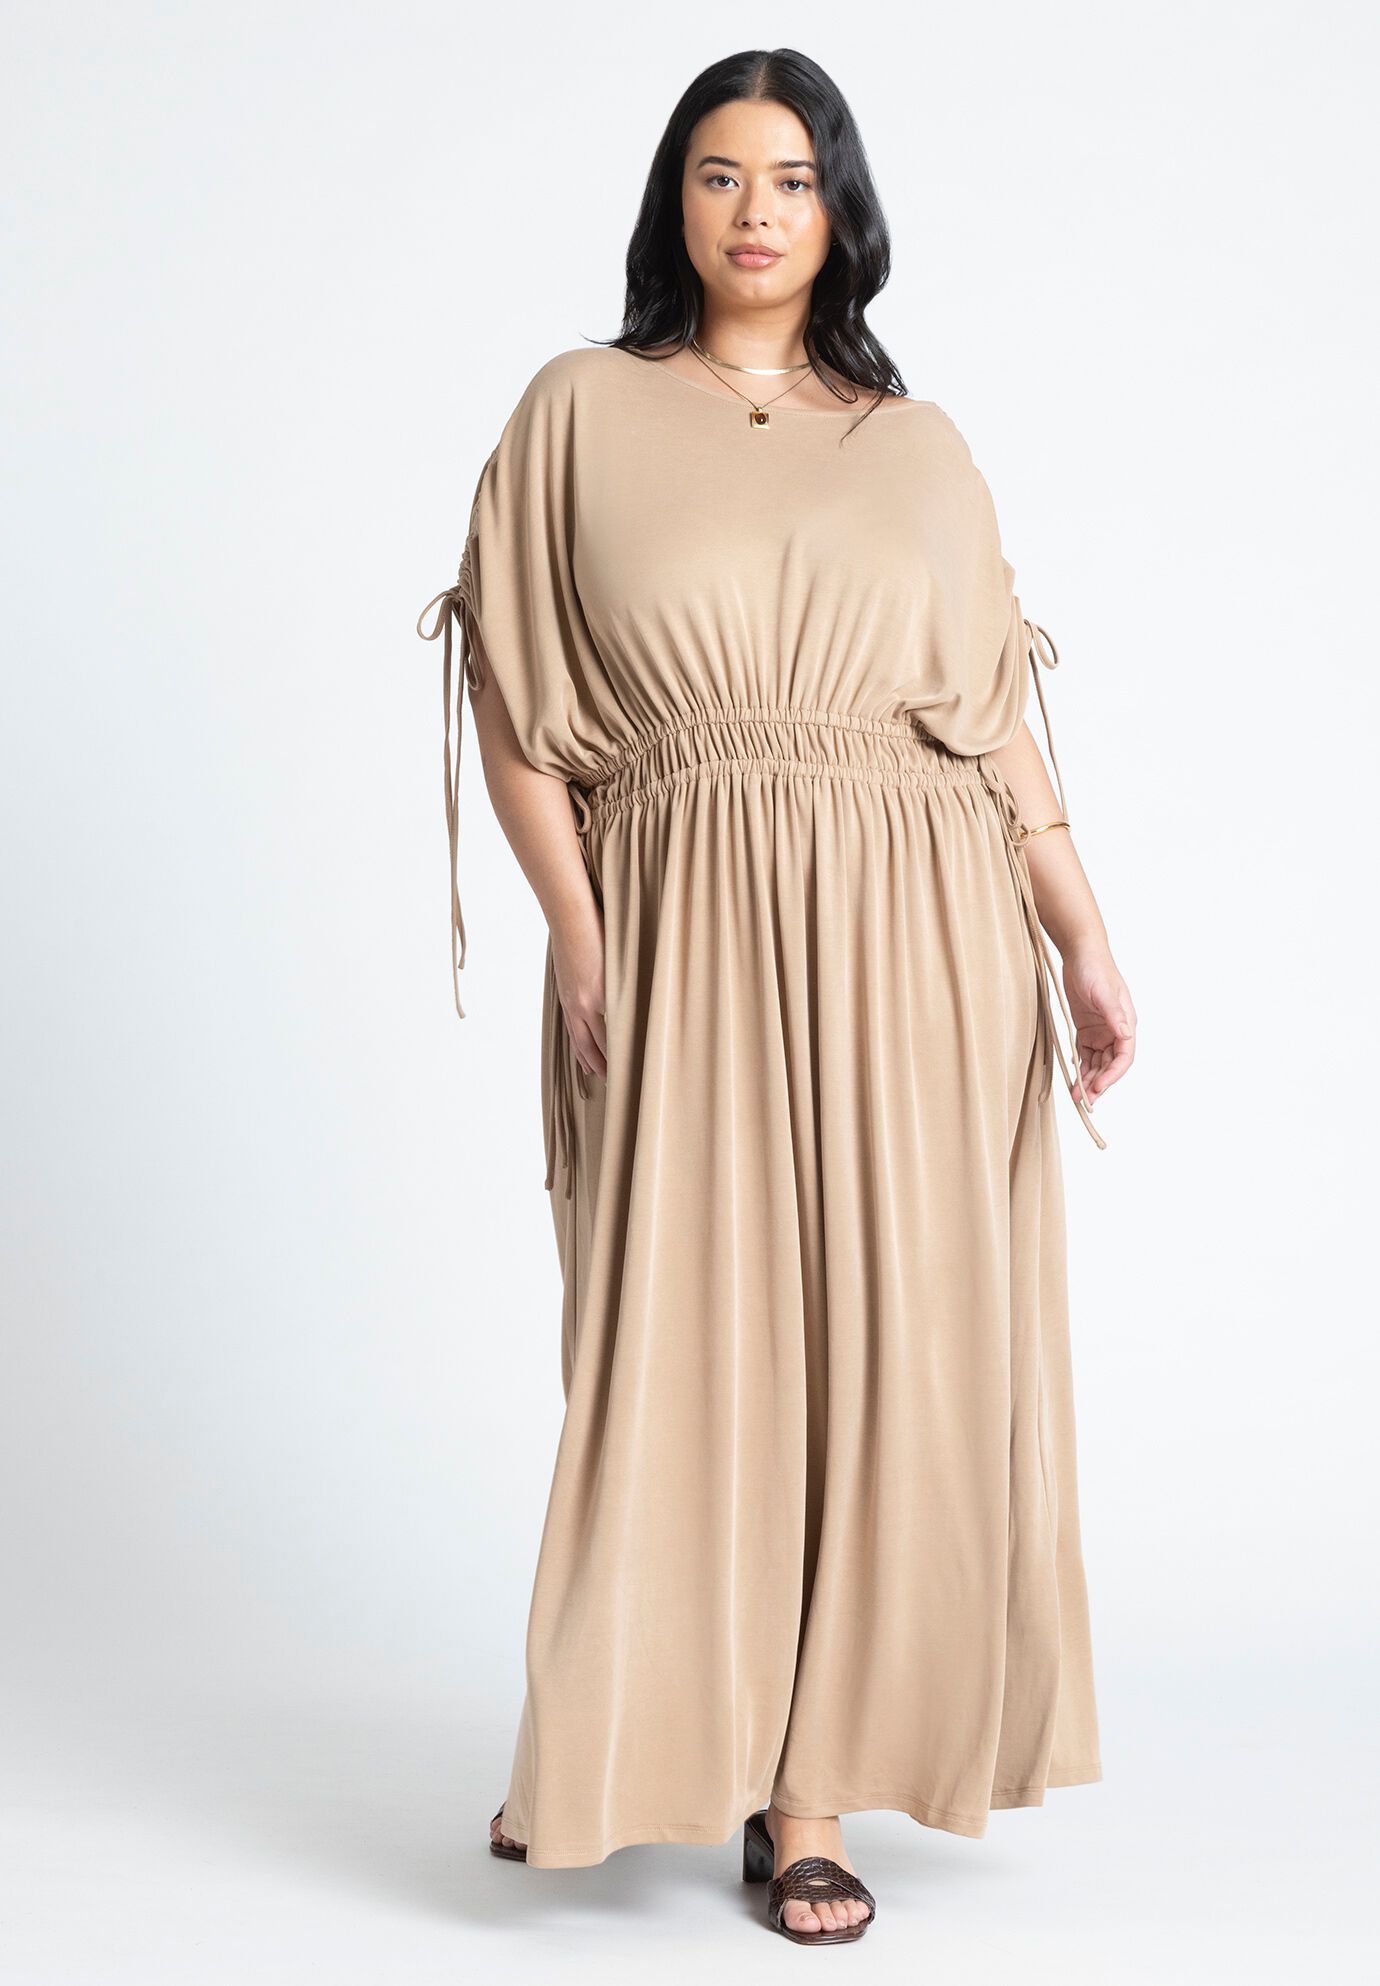 Boat Neck Dolman Sleeves Dress by Eloquii